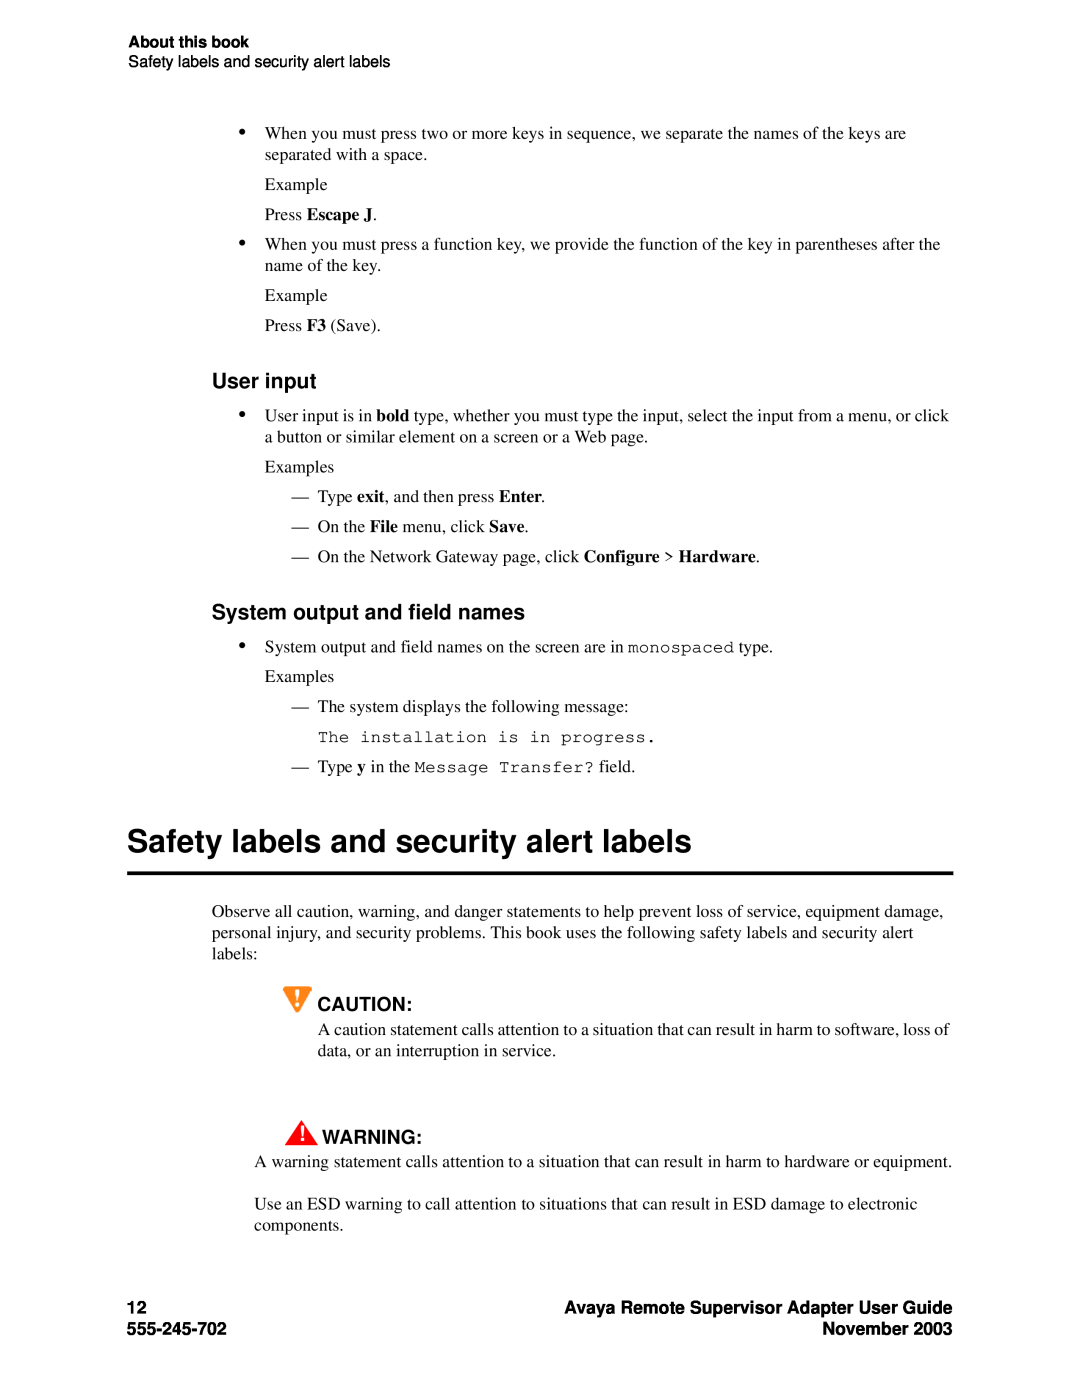 Avaya S8500 Safety labels and security alert labels, User input, System output and field names, Press Escape J, November 